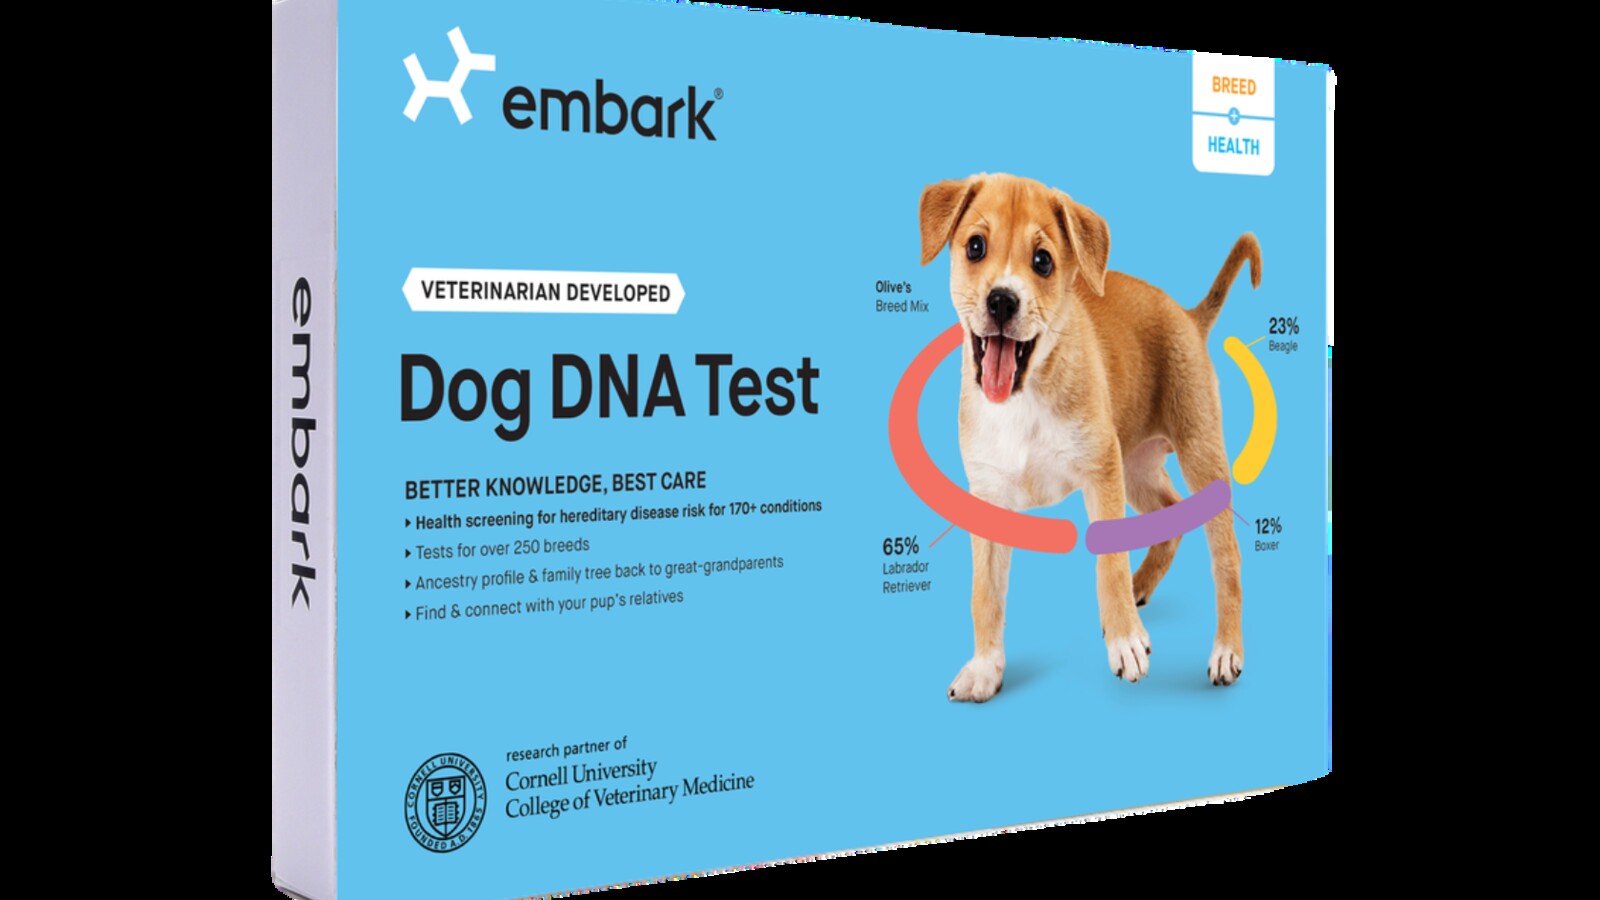 https://static.citylifestyle.com/articles/surpriseits-a-puppy/embark-dog-dna-test-1600.jpg?v=1